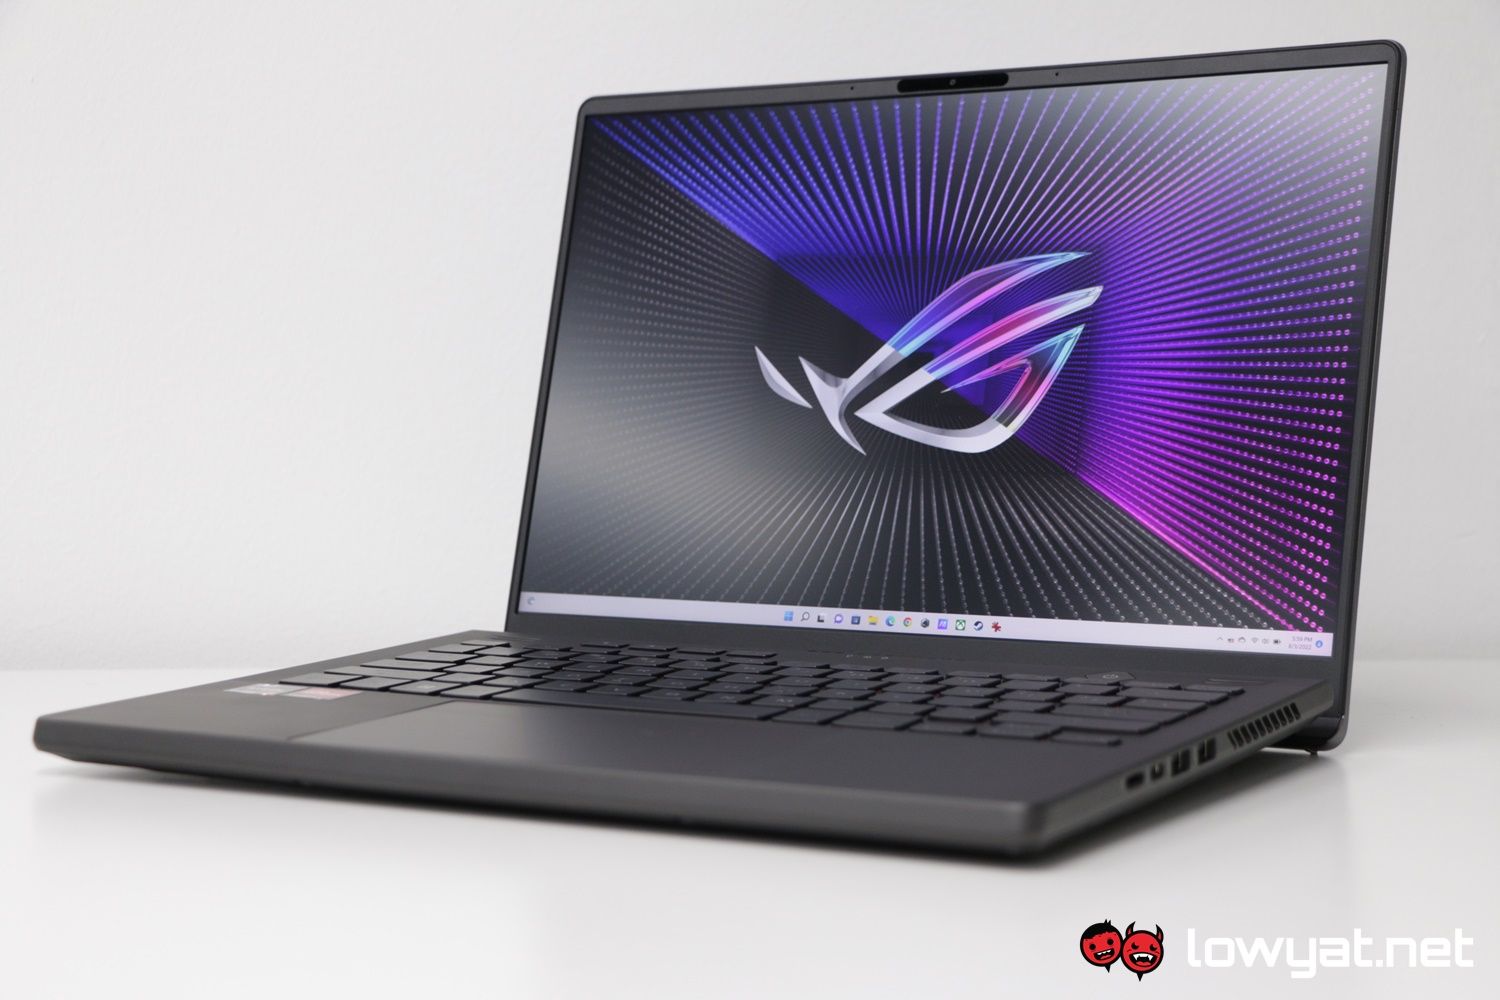 Asus ROG Zephyrus G14 (2022) review: Punching above its weight class